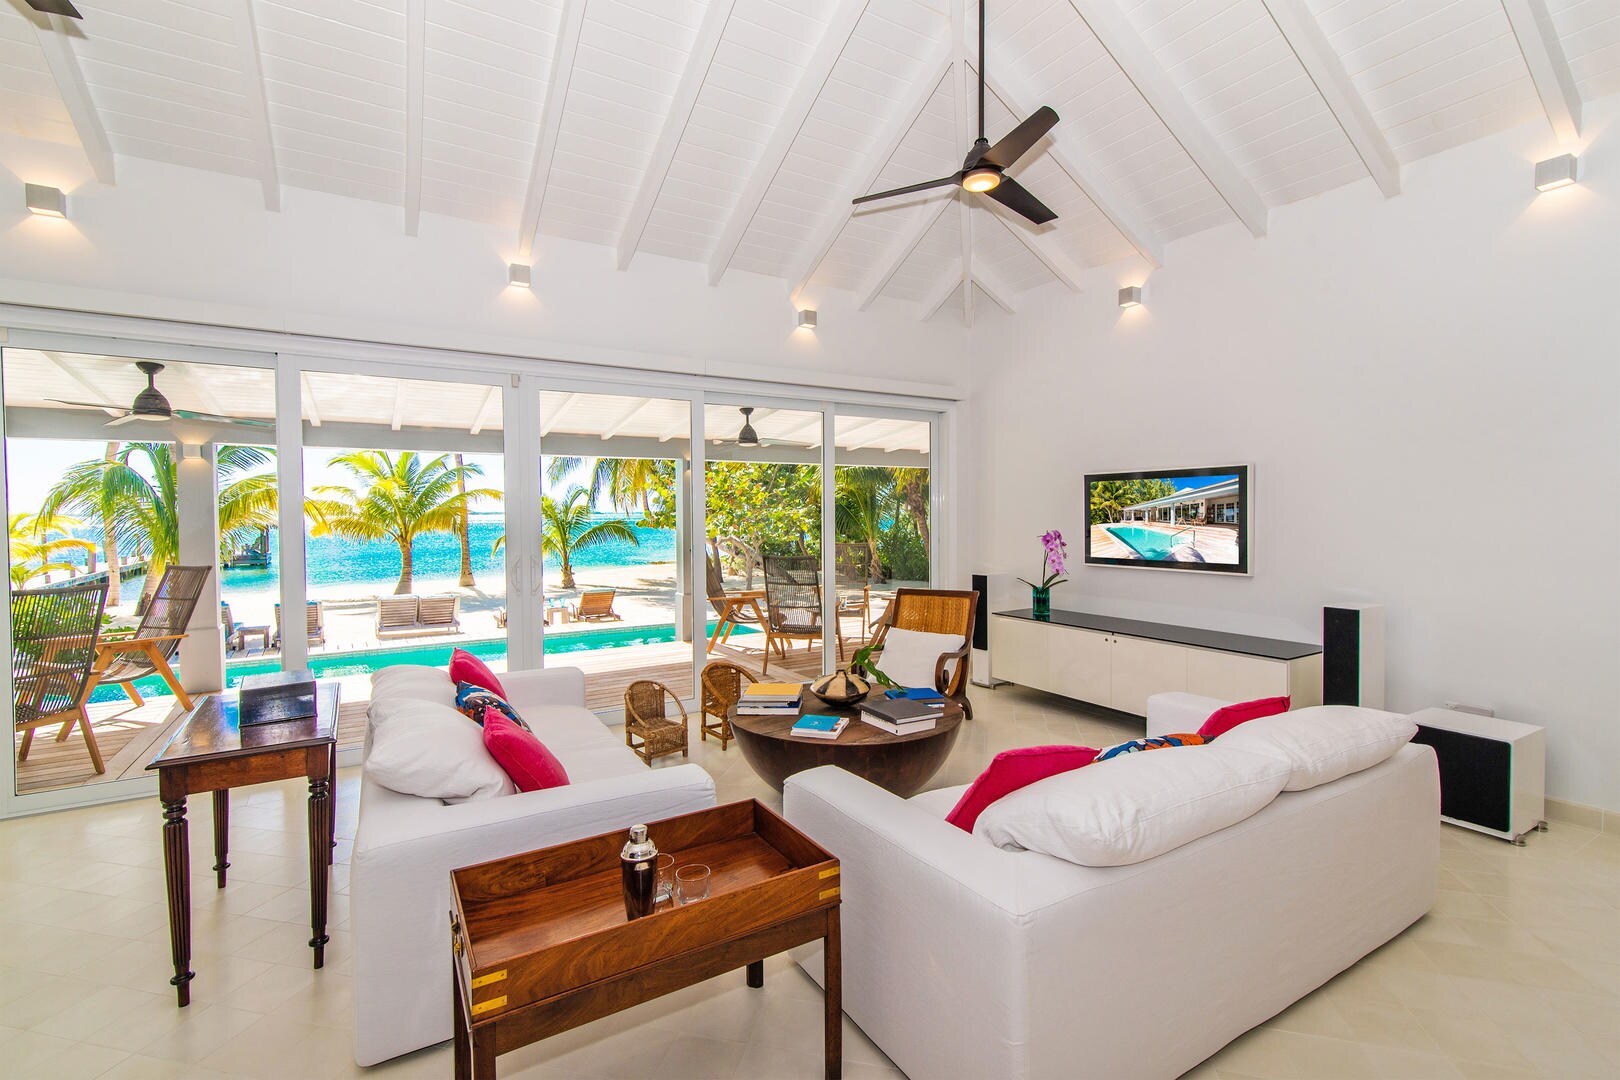 Property Image 2 - Beautifully Decorated Beach Villa with Al fresco Dining